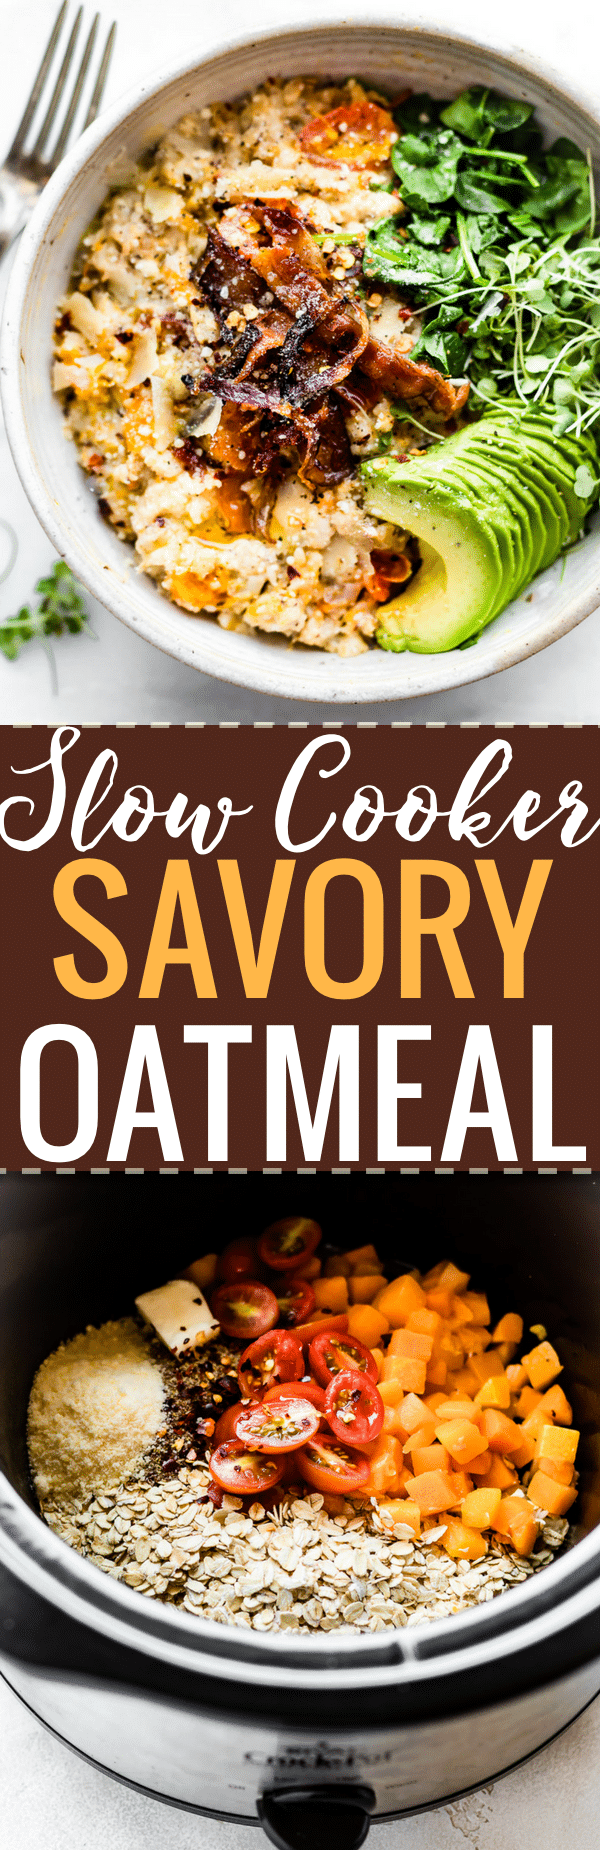 his Savory slow cooker oatmeal with crispy bacon will make you jump out of bed! A savory spin to your regular sweet oatmeal and total crowd pleaser dish, which is perfect for busy mornings! A Slow cooker oatmeal made with the addition butternut squash, garlic, herbs, parmesan cheese, and topped with crispy bacon and avocado. An easy to make well-rounded healthy meal for any time of day. Dairy free options